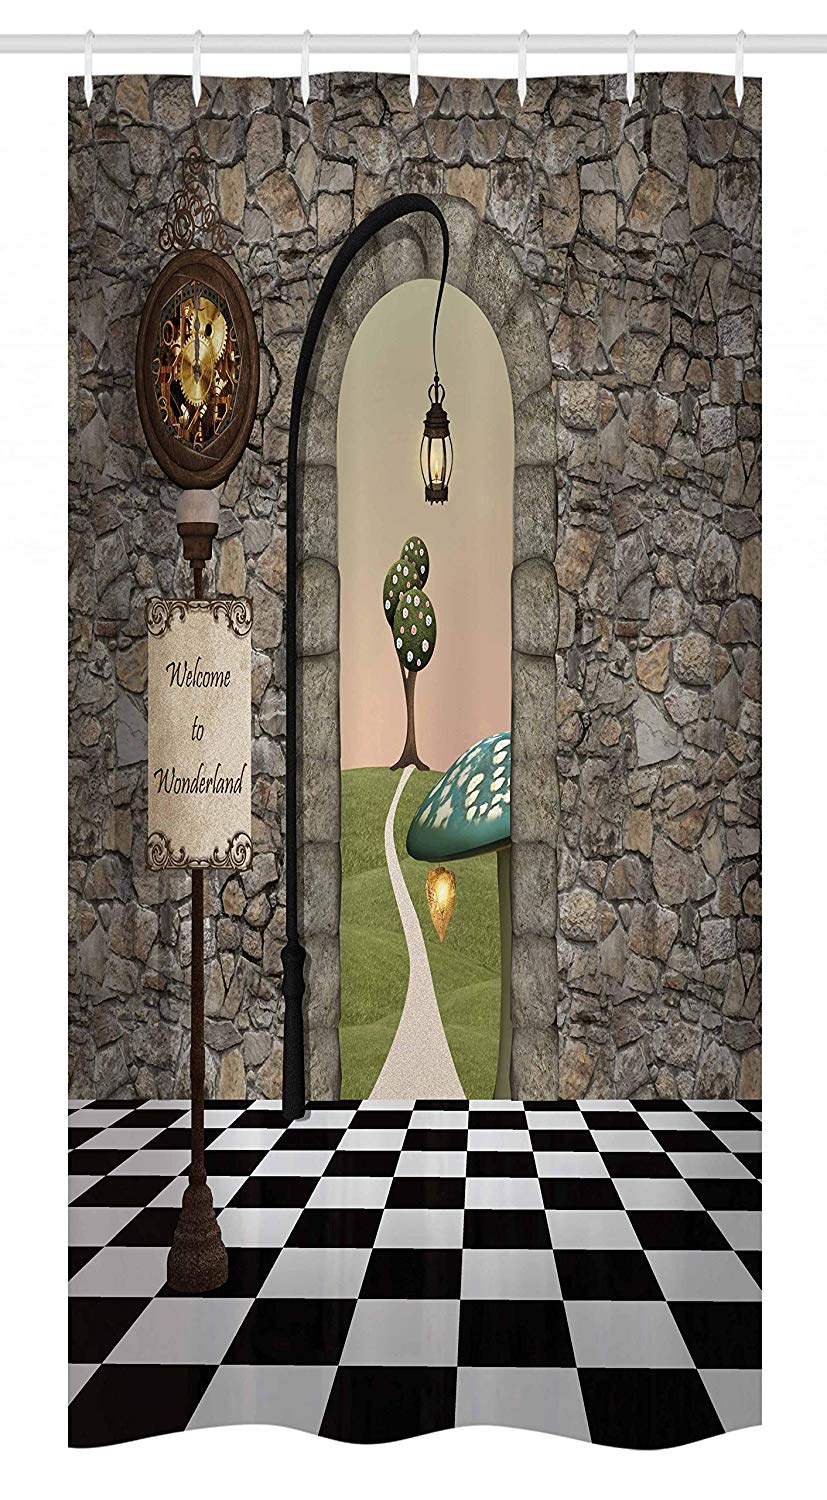 Ambesonne Alice in Wonderland Stall Shower Curtain, Welcome Wonderland Black and White Floor Landscape Mushroom Lantern, Fabric Bathroom Decor Set with Hooks, 36 W x 72 L Inches, Multicolor